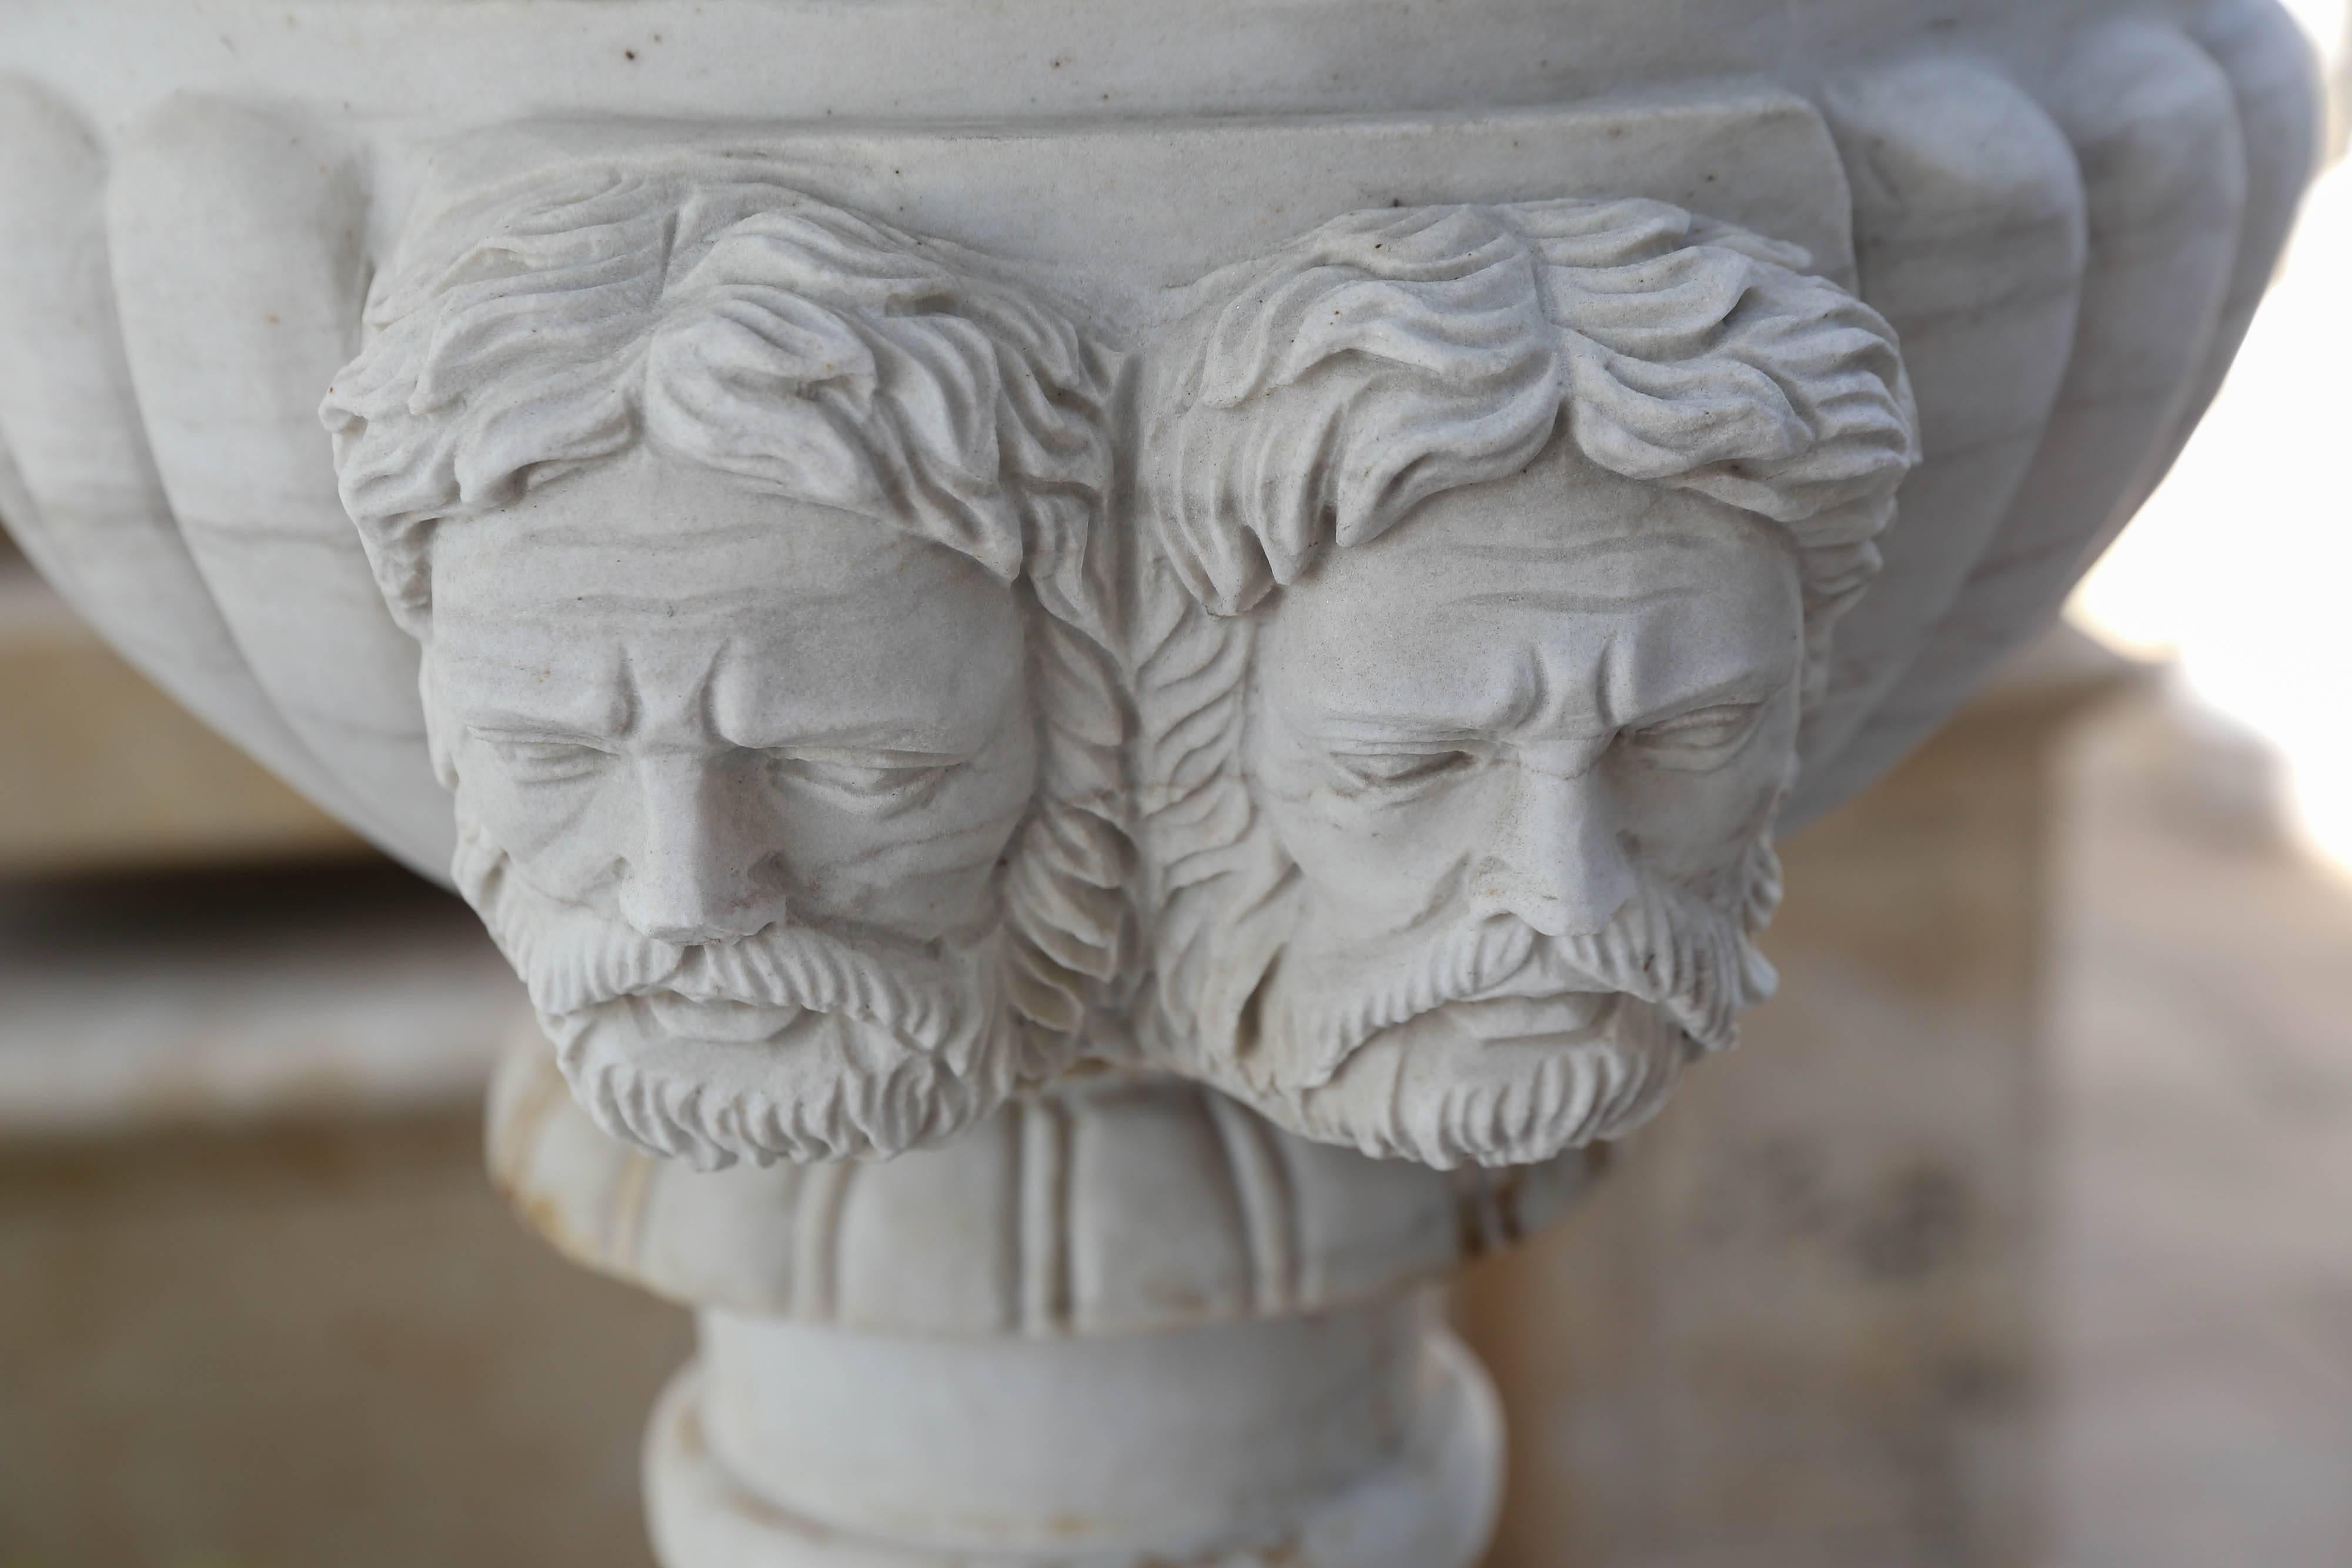 Pair of Monumental Garden Planters Made of Carved Carrara Marble 1